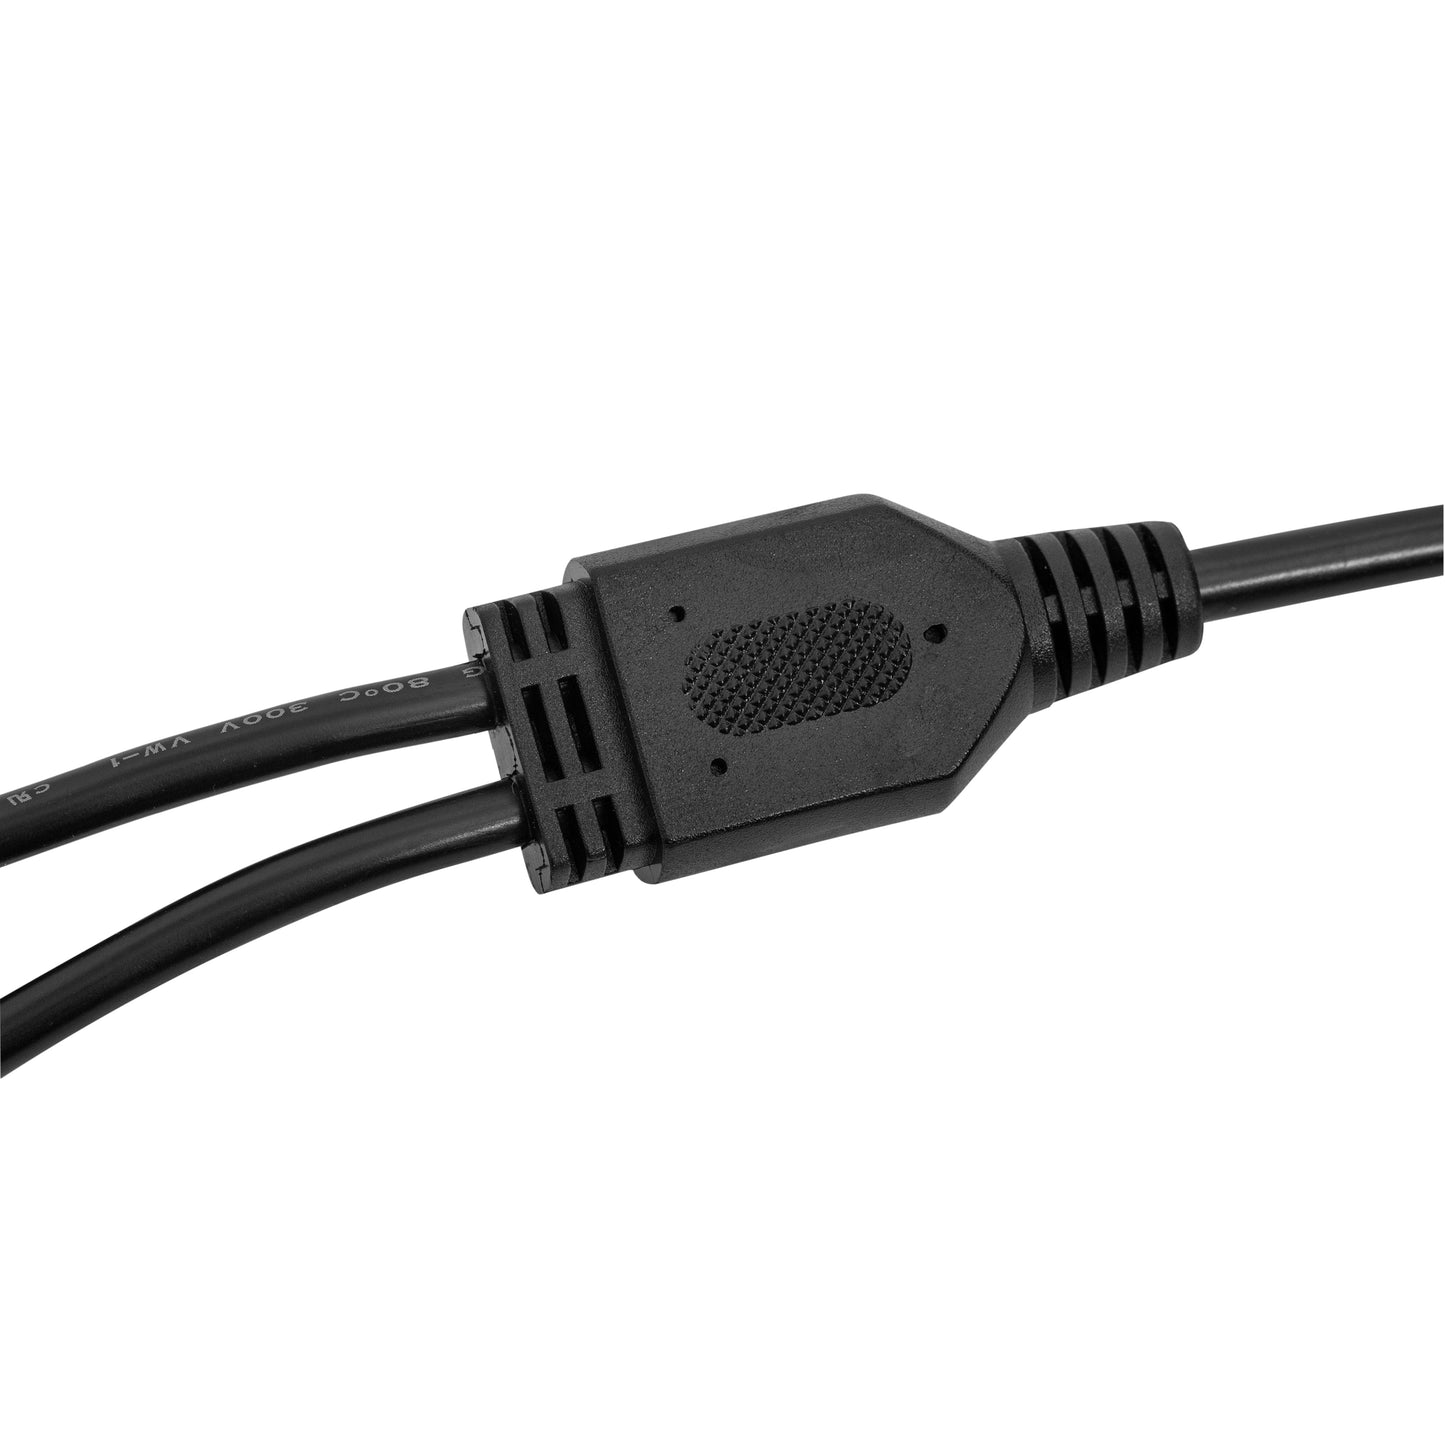 SunJack Y-Branch Parallel Adapter Splitter Cable 10ft